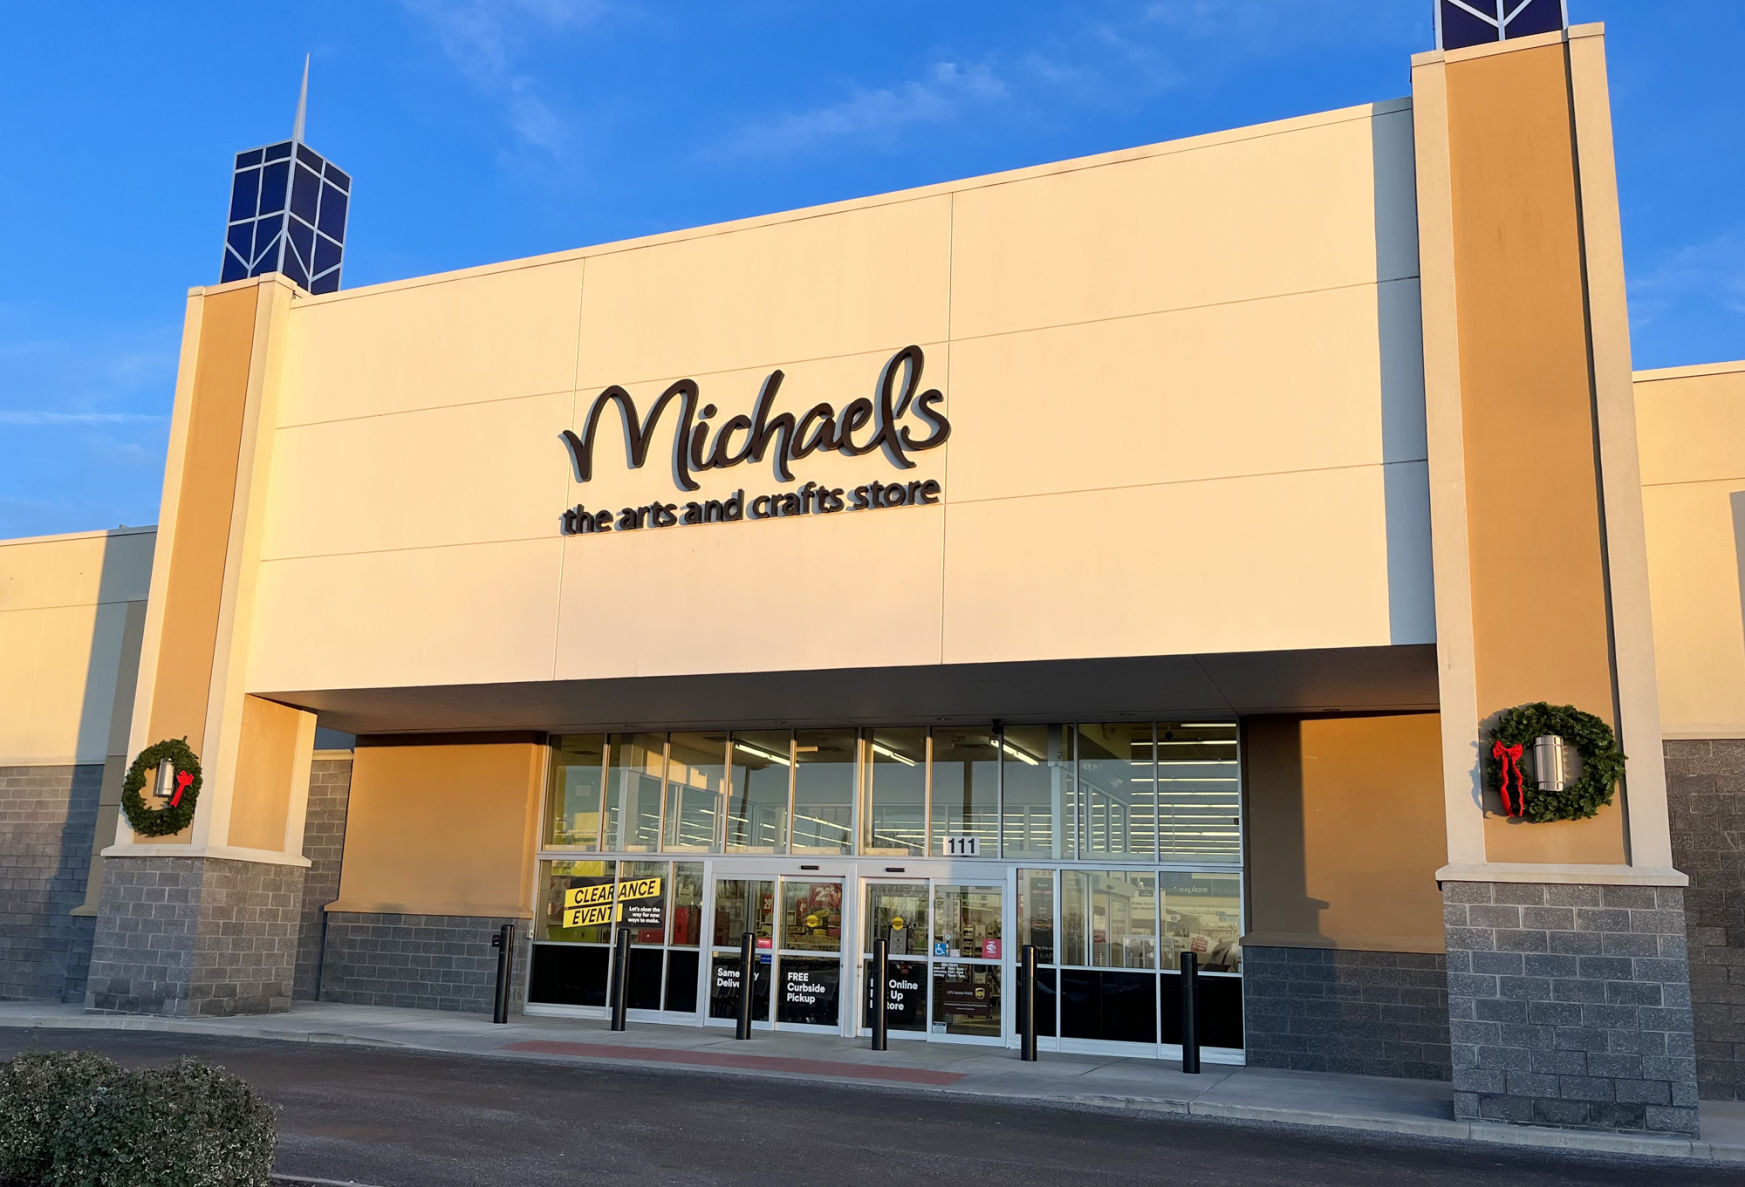 After acquisition, still 'business as usual' for Michaels, News